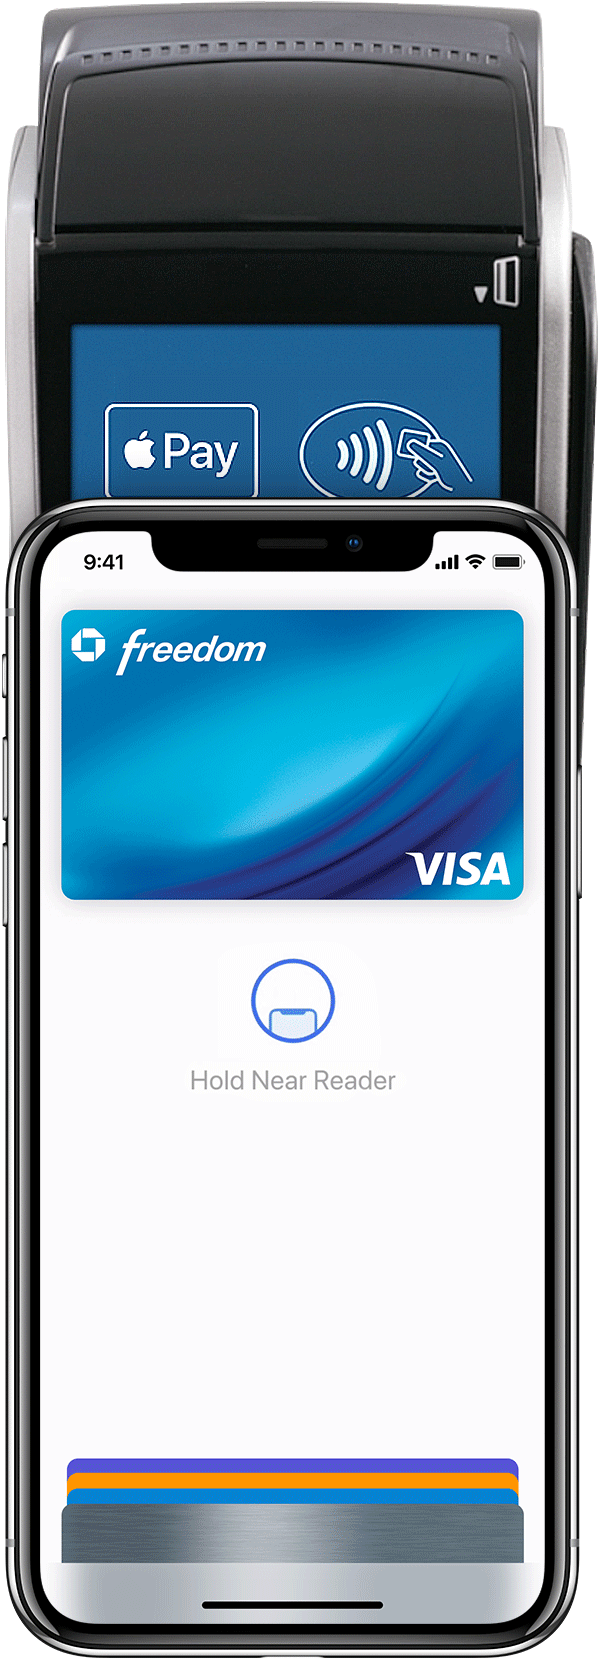 Ios12 iphone x pay with apple pay reader animation